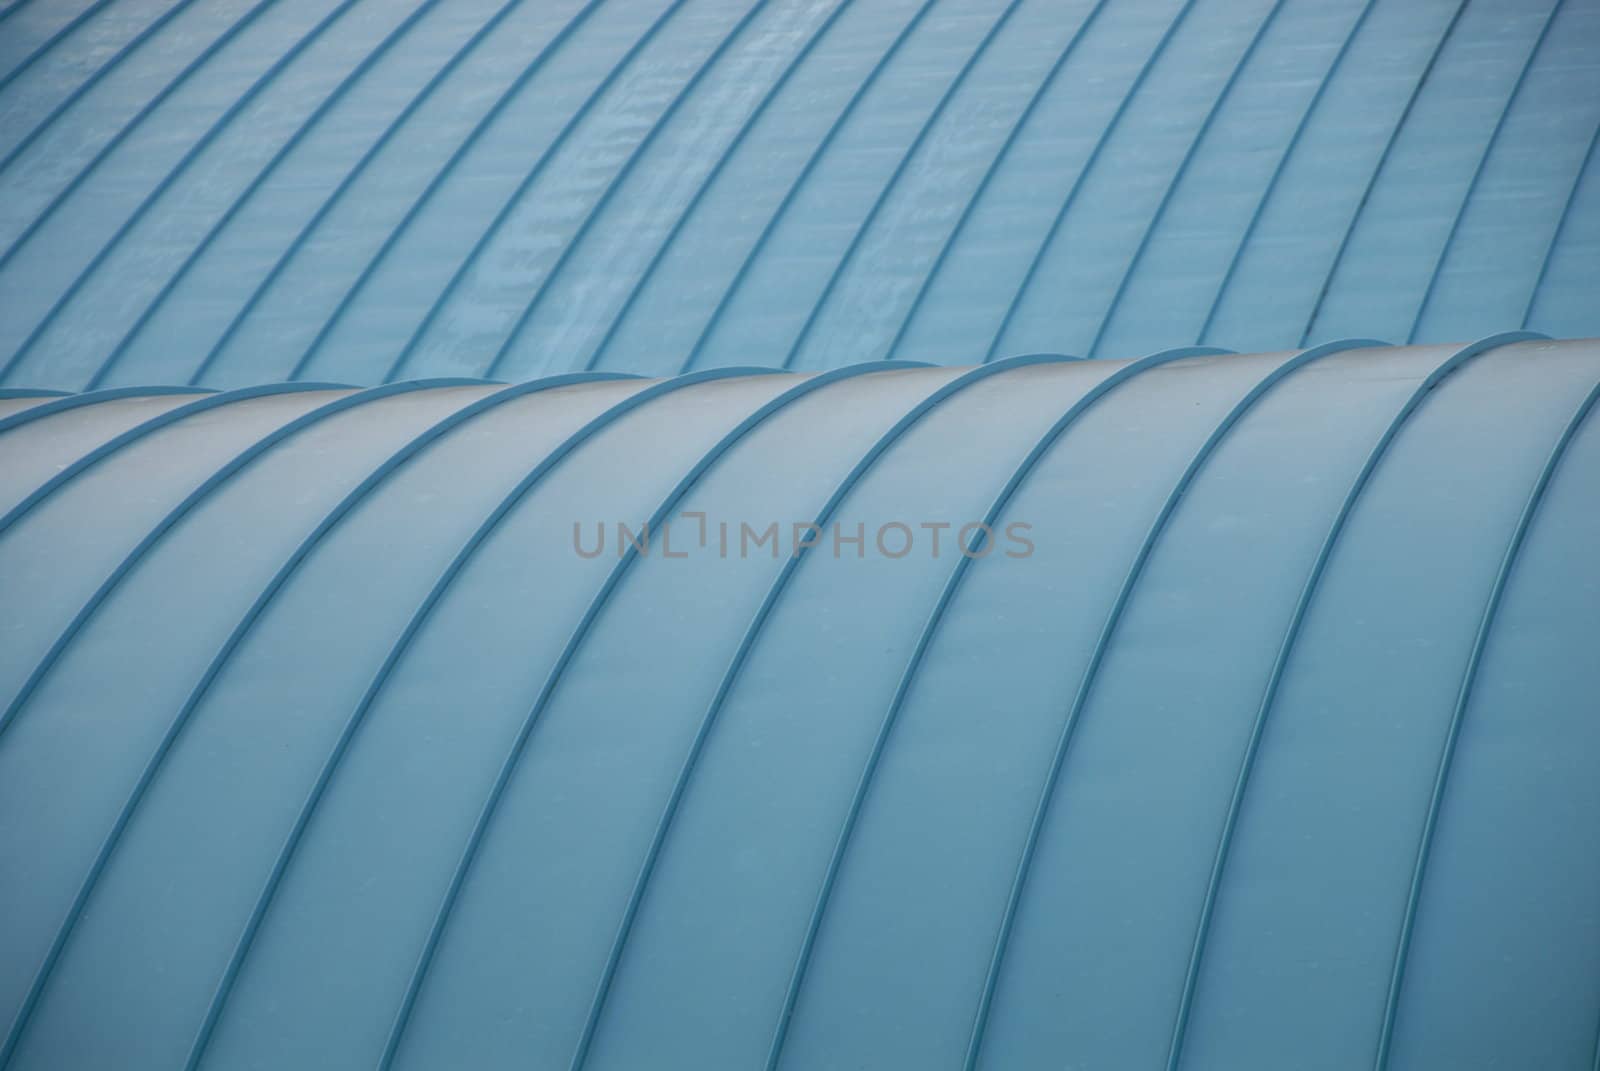 Blue roof by northwoodsphoto